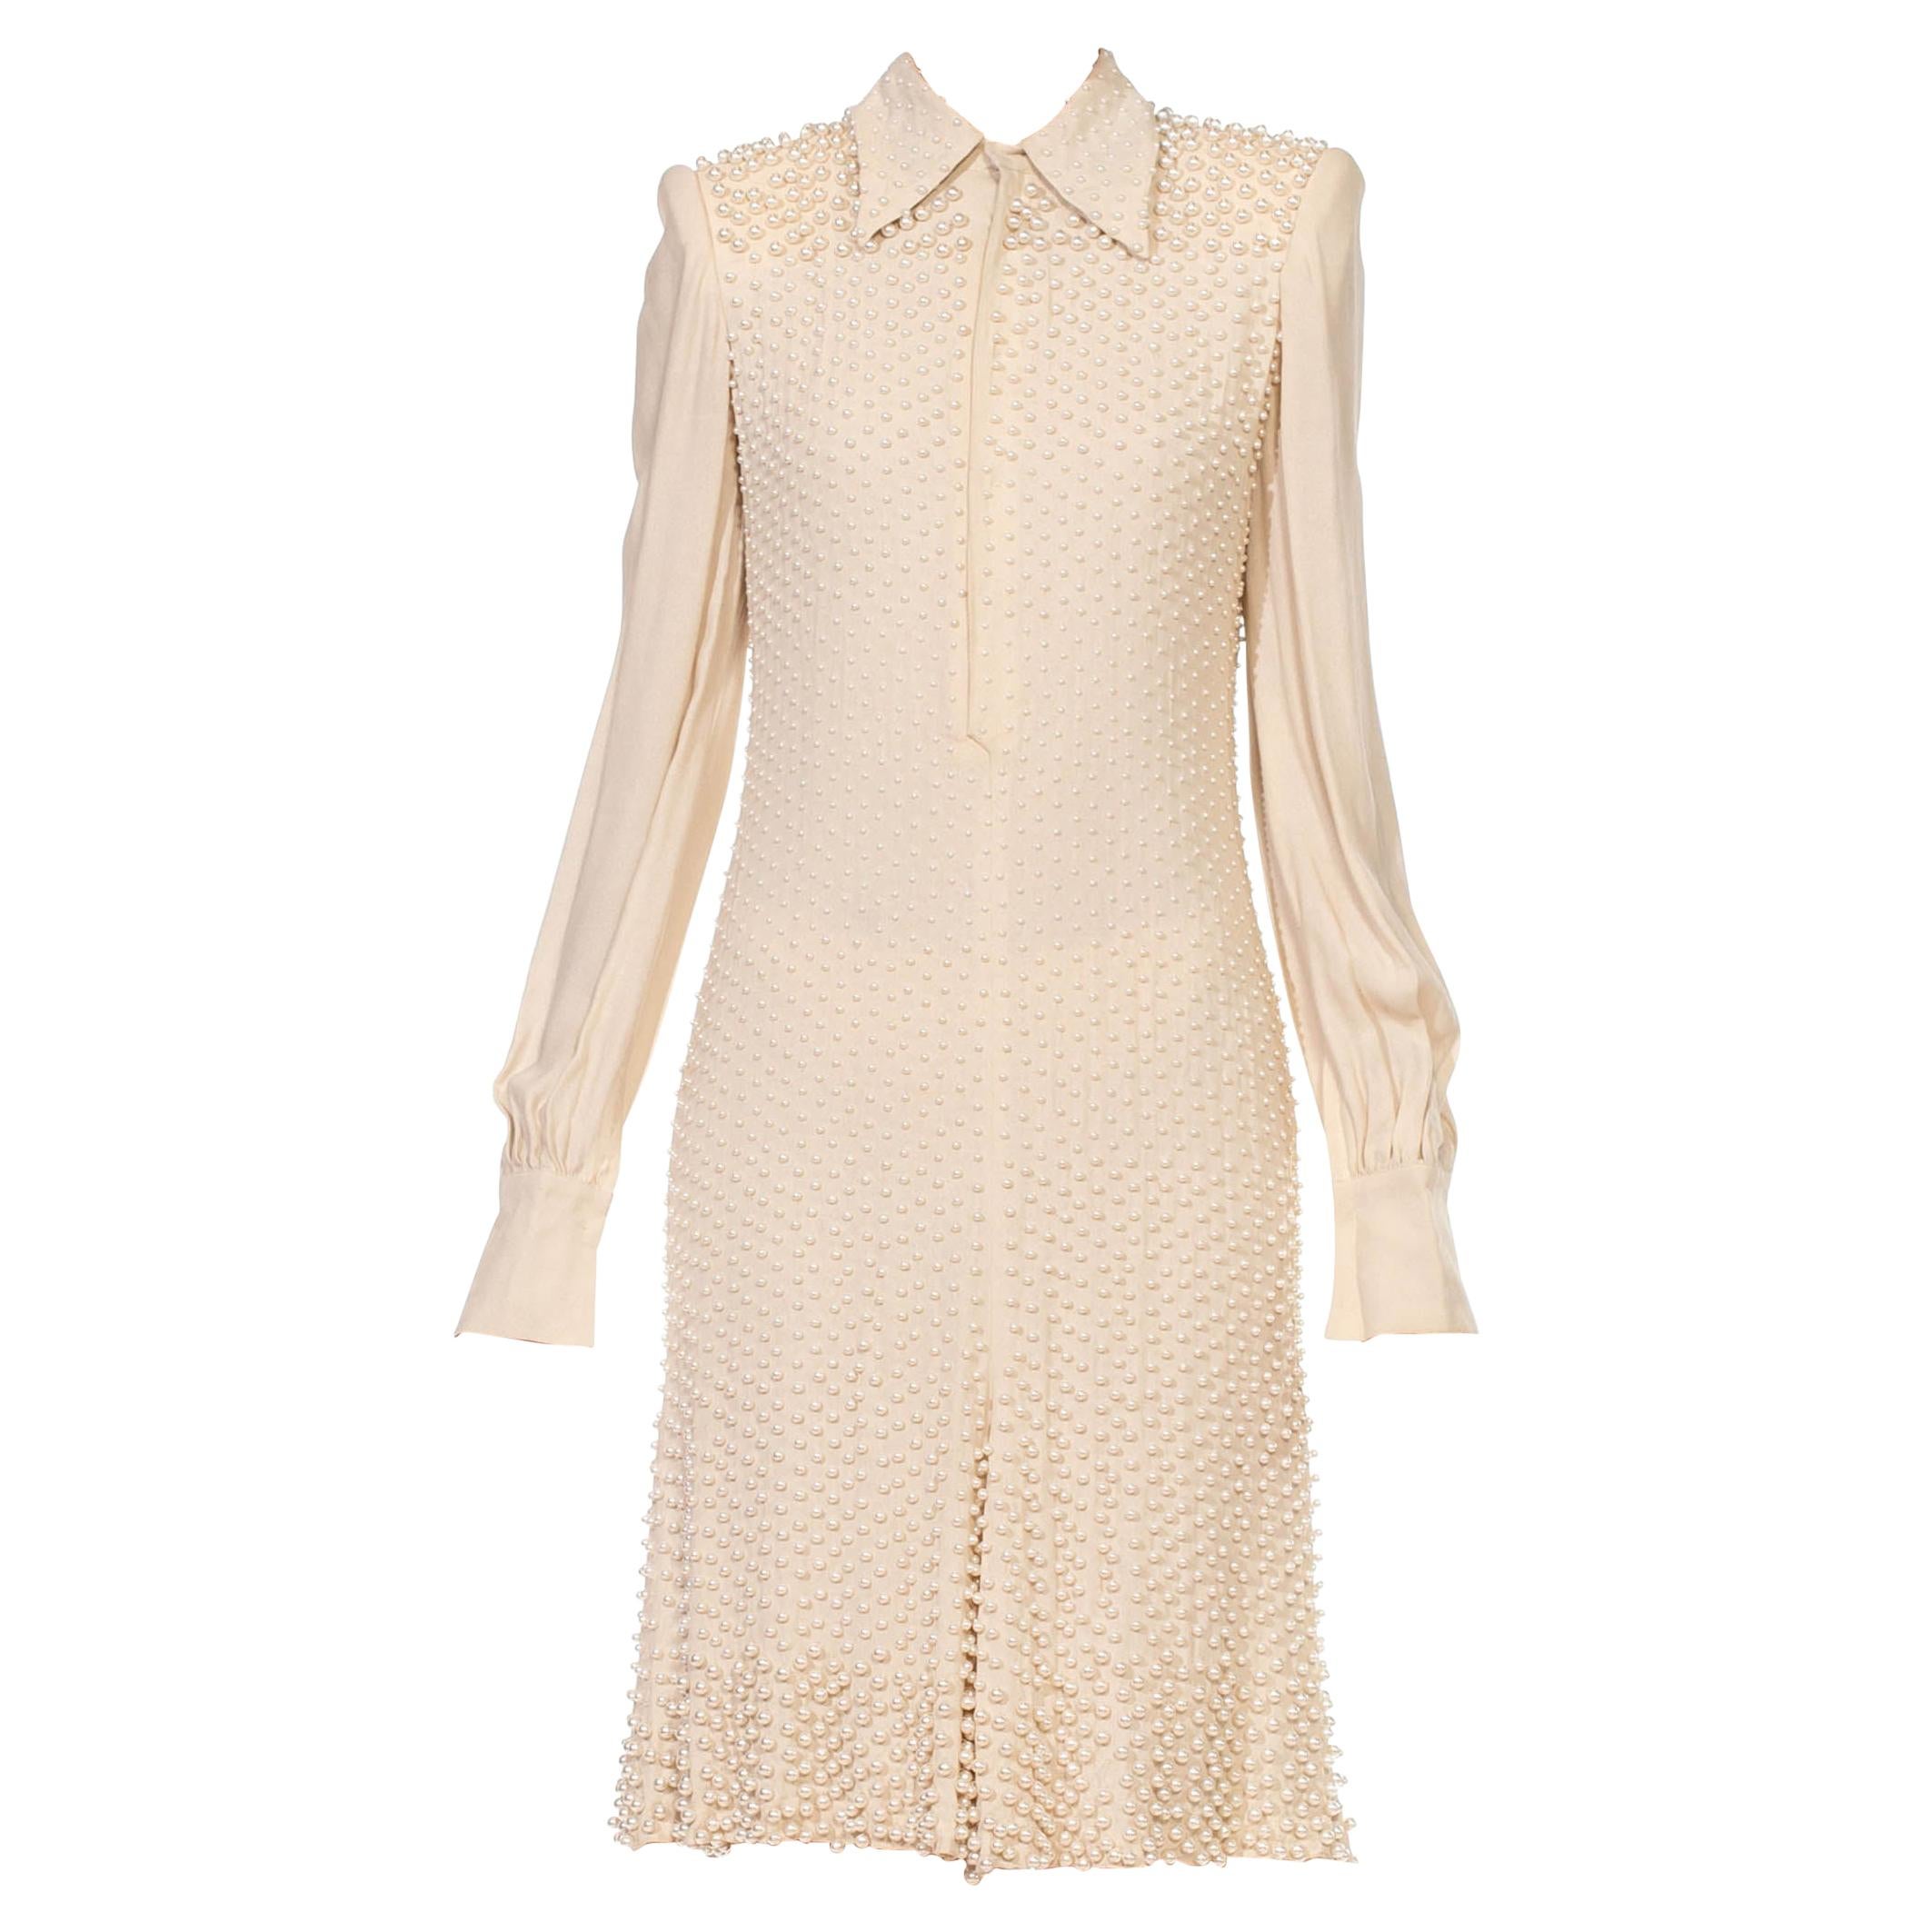 2000S JEAN PAUL GAULTIER Cream Silk Long Sleeved Cocktail Dress Covered In Pear For Sale